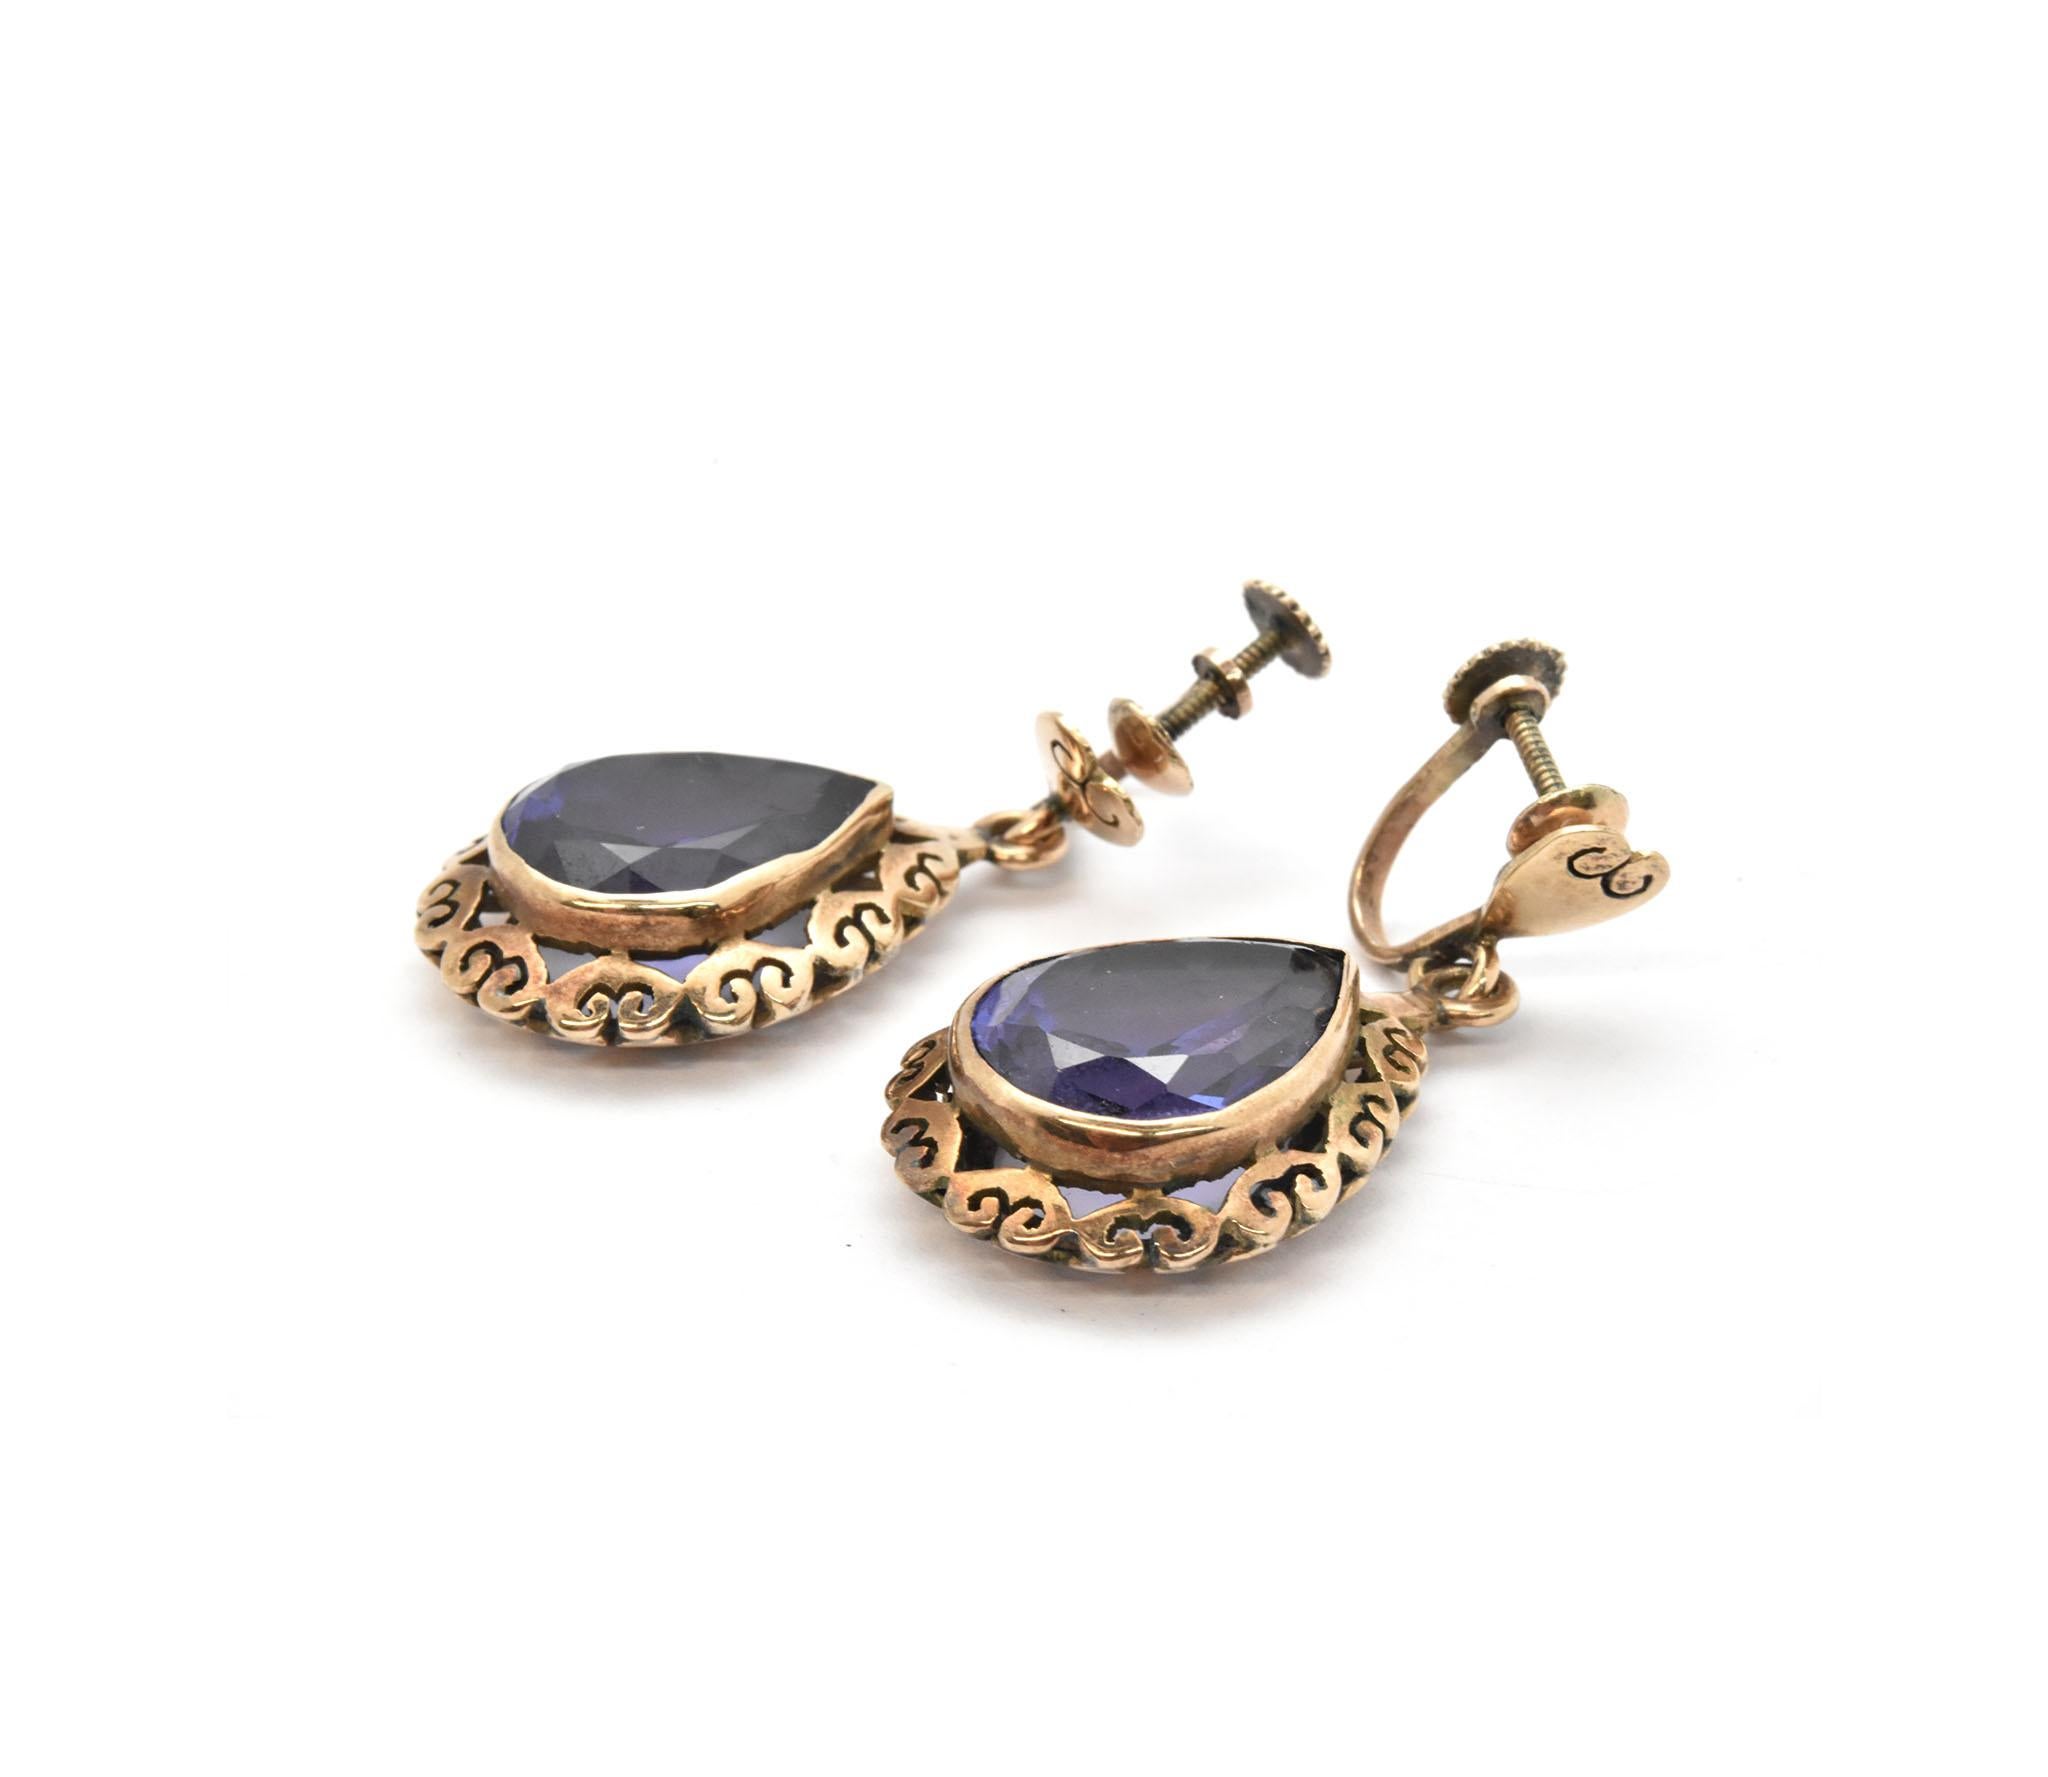 This antique pair of dangle earrings is made in 14k yellow gold with screw-tight, non-pierced backings. The earrings have bezel set pear-shaped amethyst gemstones surrounded by a hand-pierced heart shaped yellow gold decorated frame. The amethyst